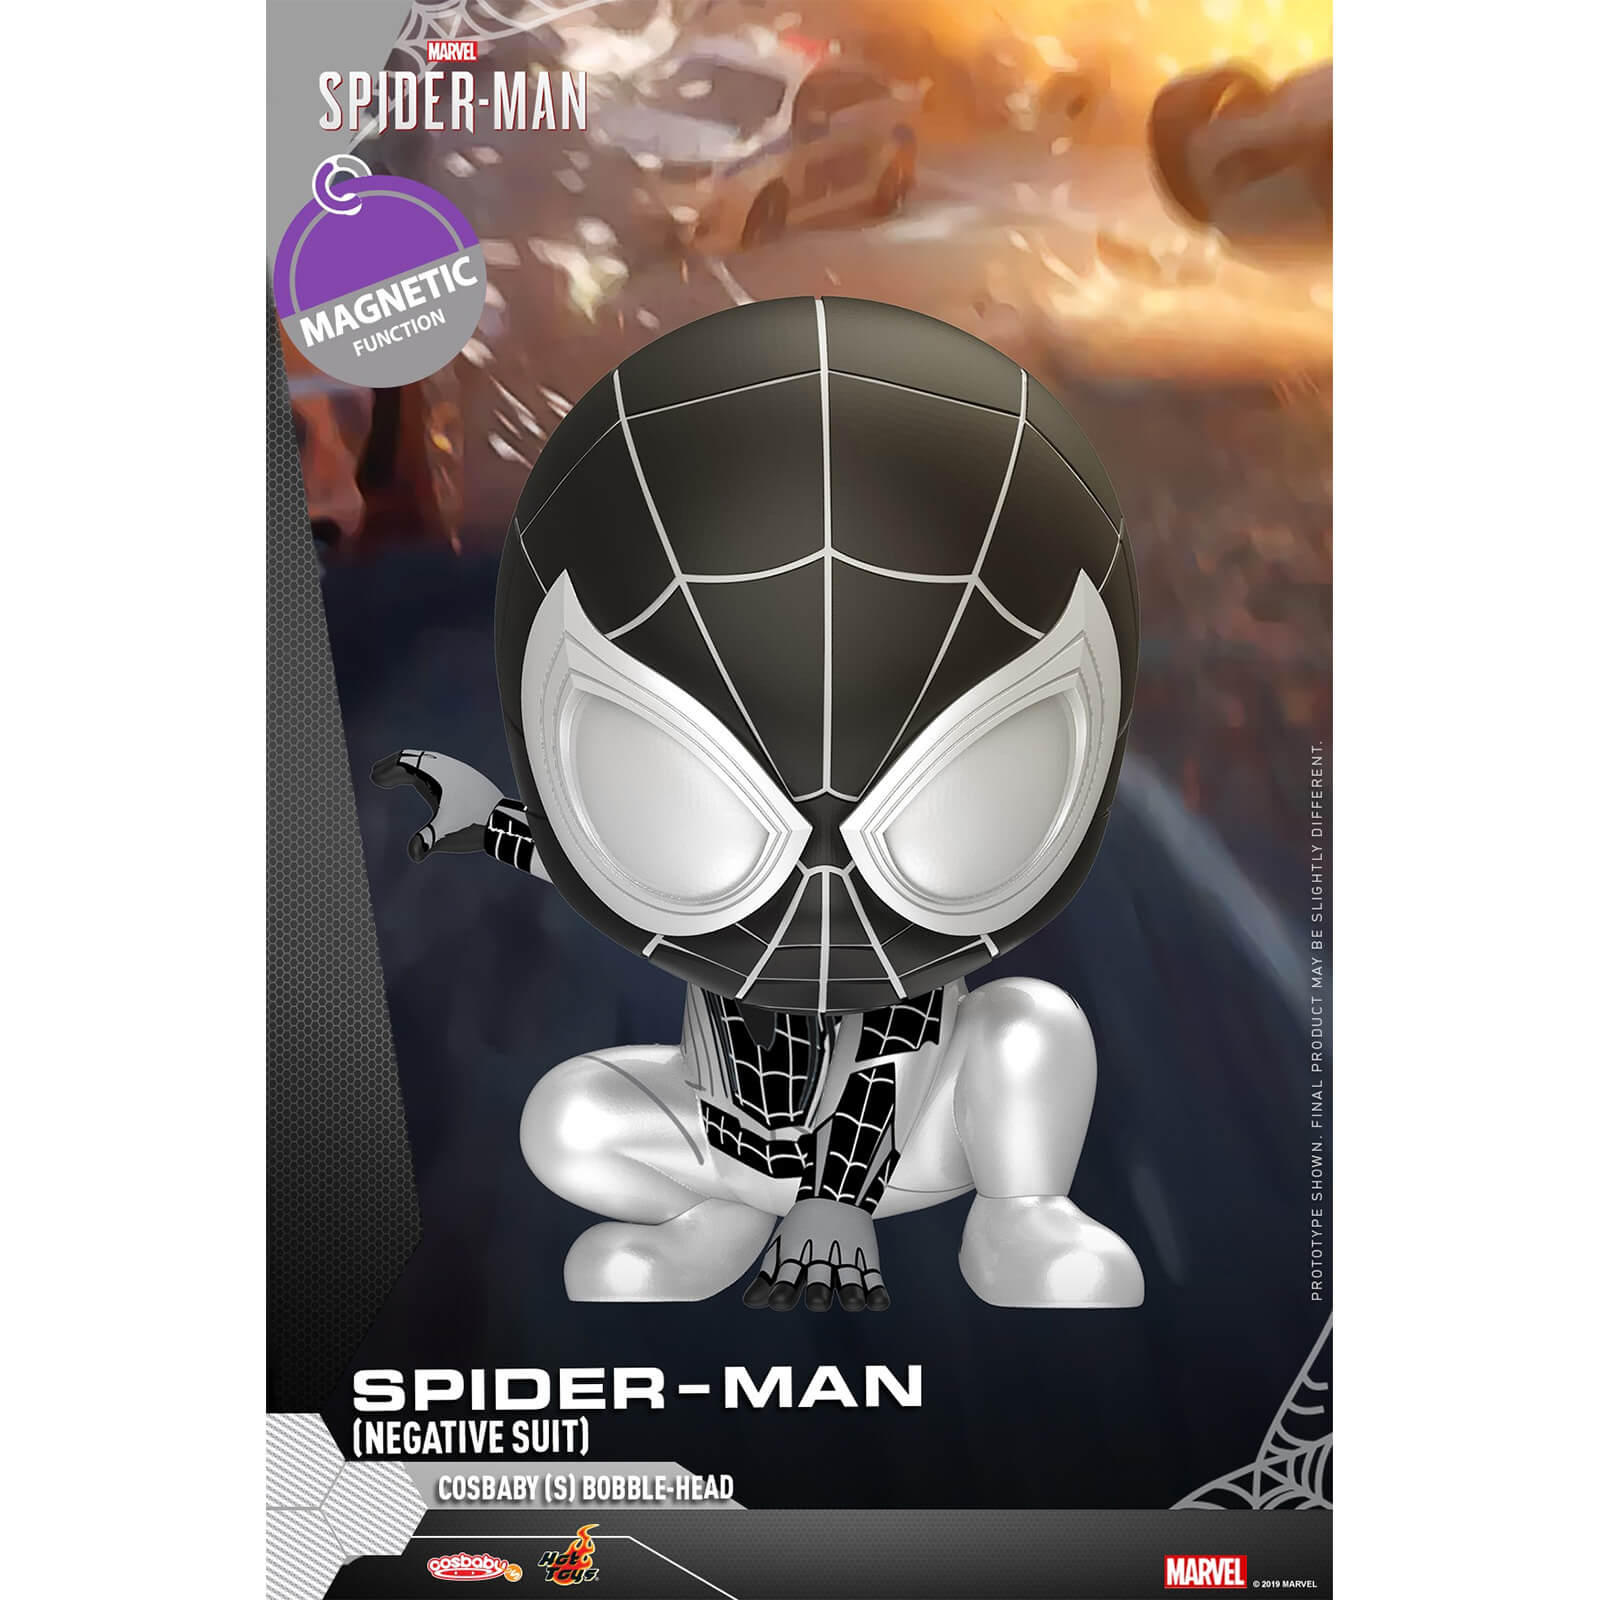 Image of Hot Toys Cosbaby Marvel's Spider-Man PS4 - Spider-Man (Negative Suit Version) Figure